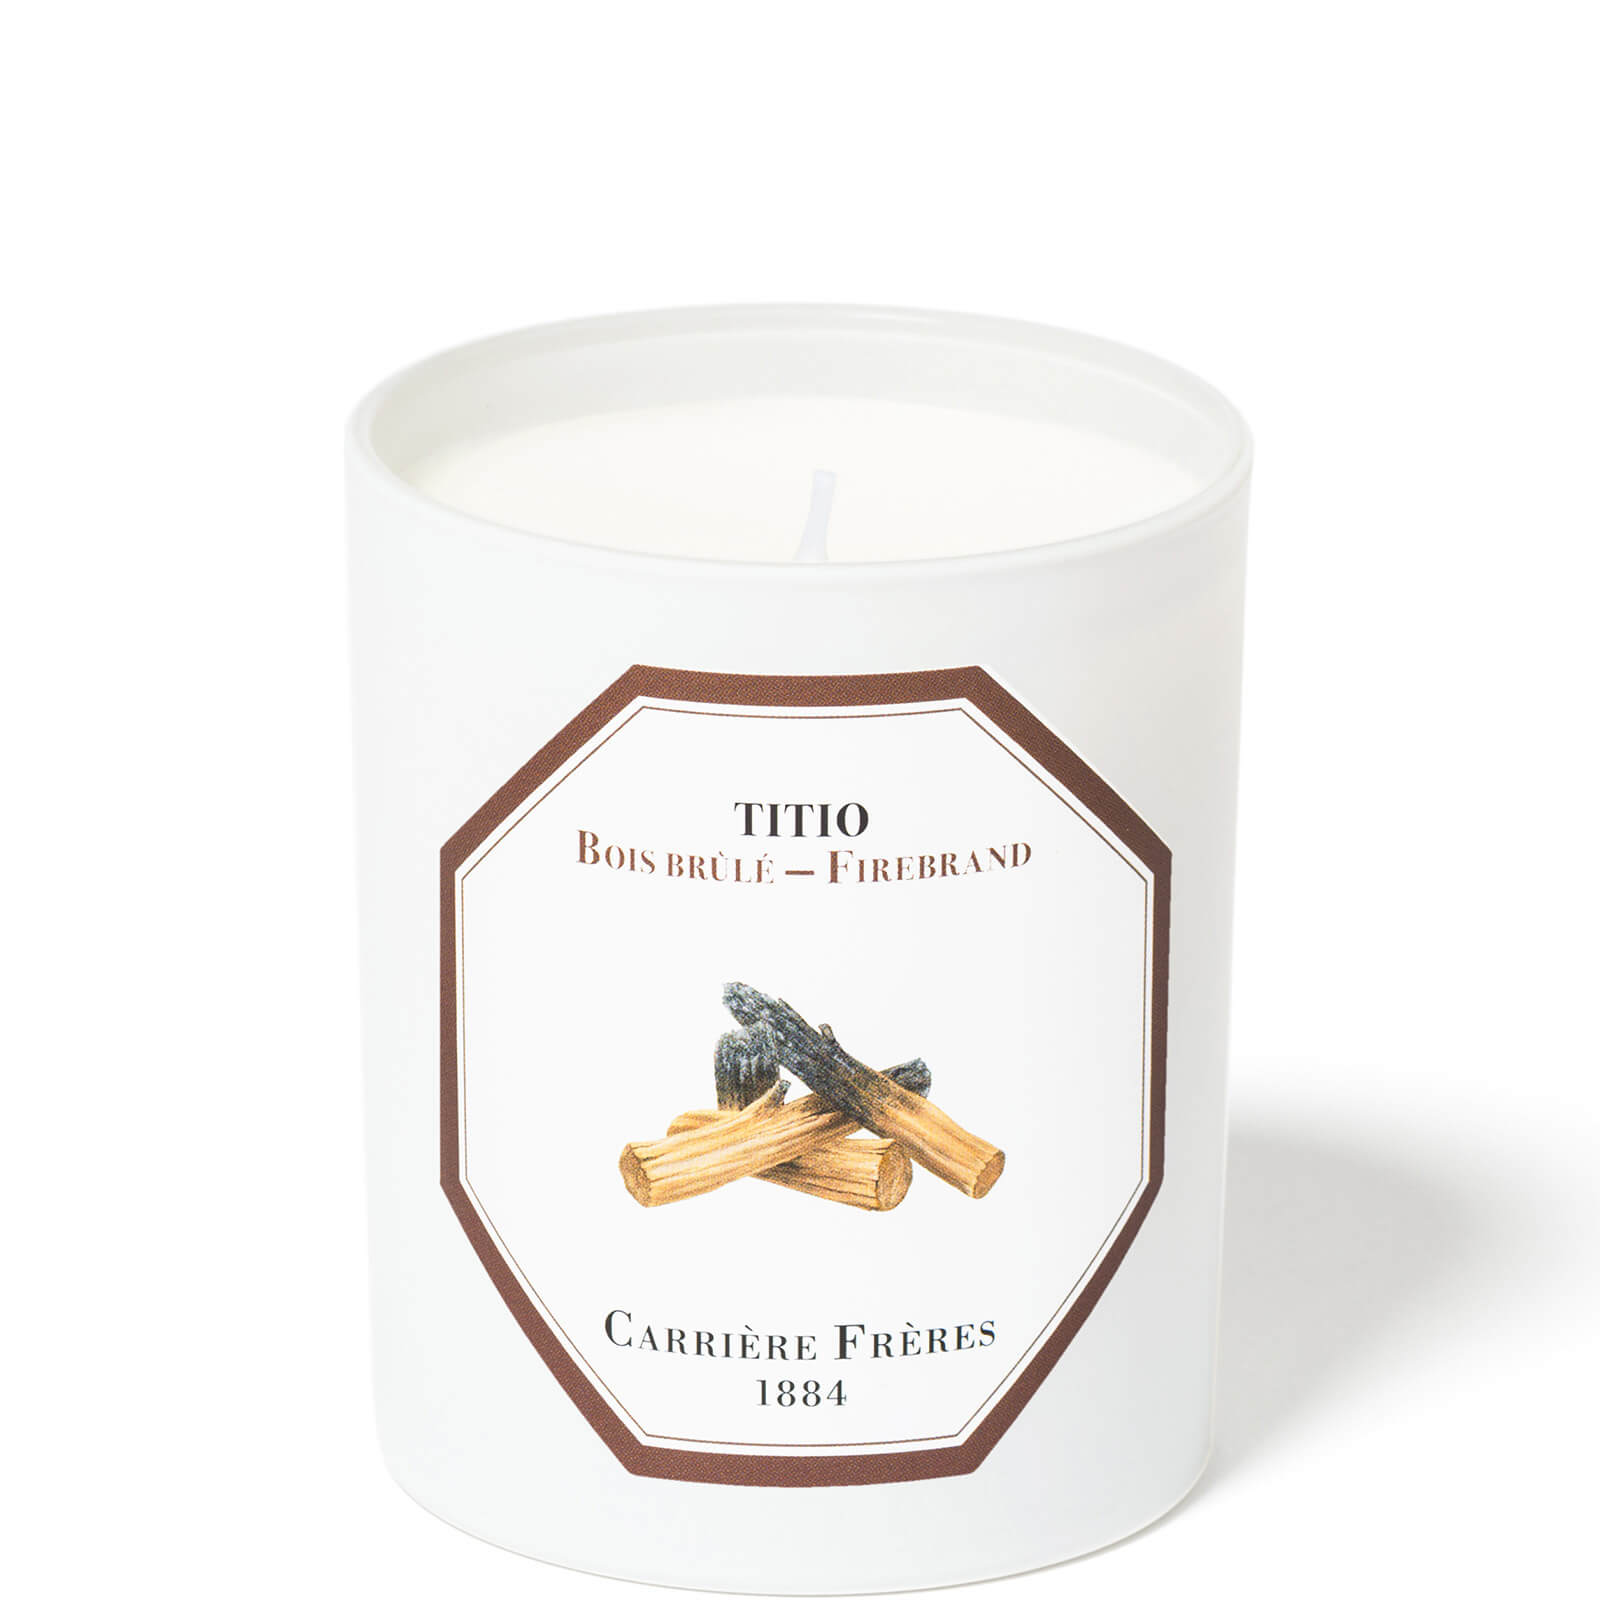 Image of Carrière Frères Scented Candle Firebrand - Titio - 185 g